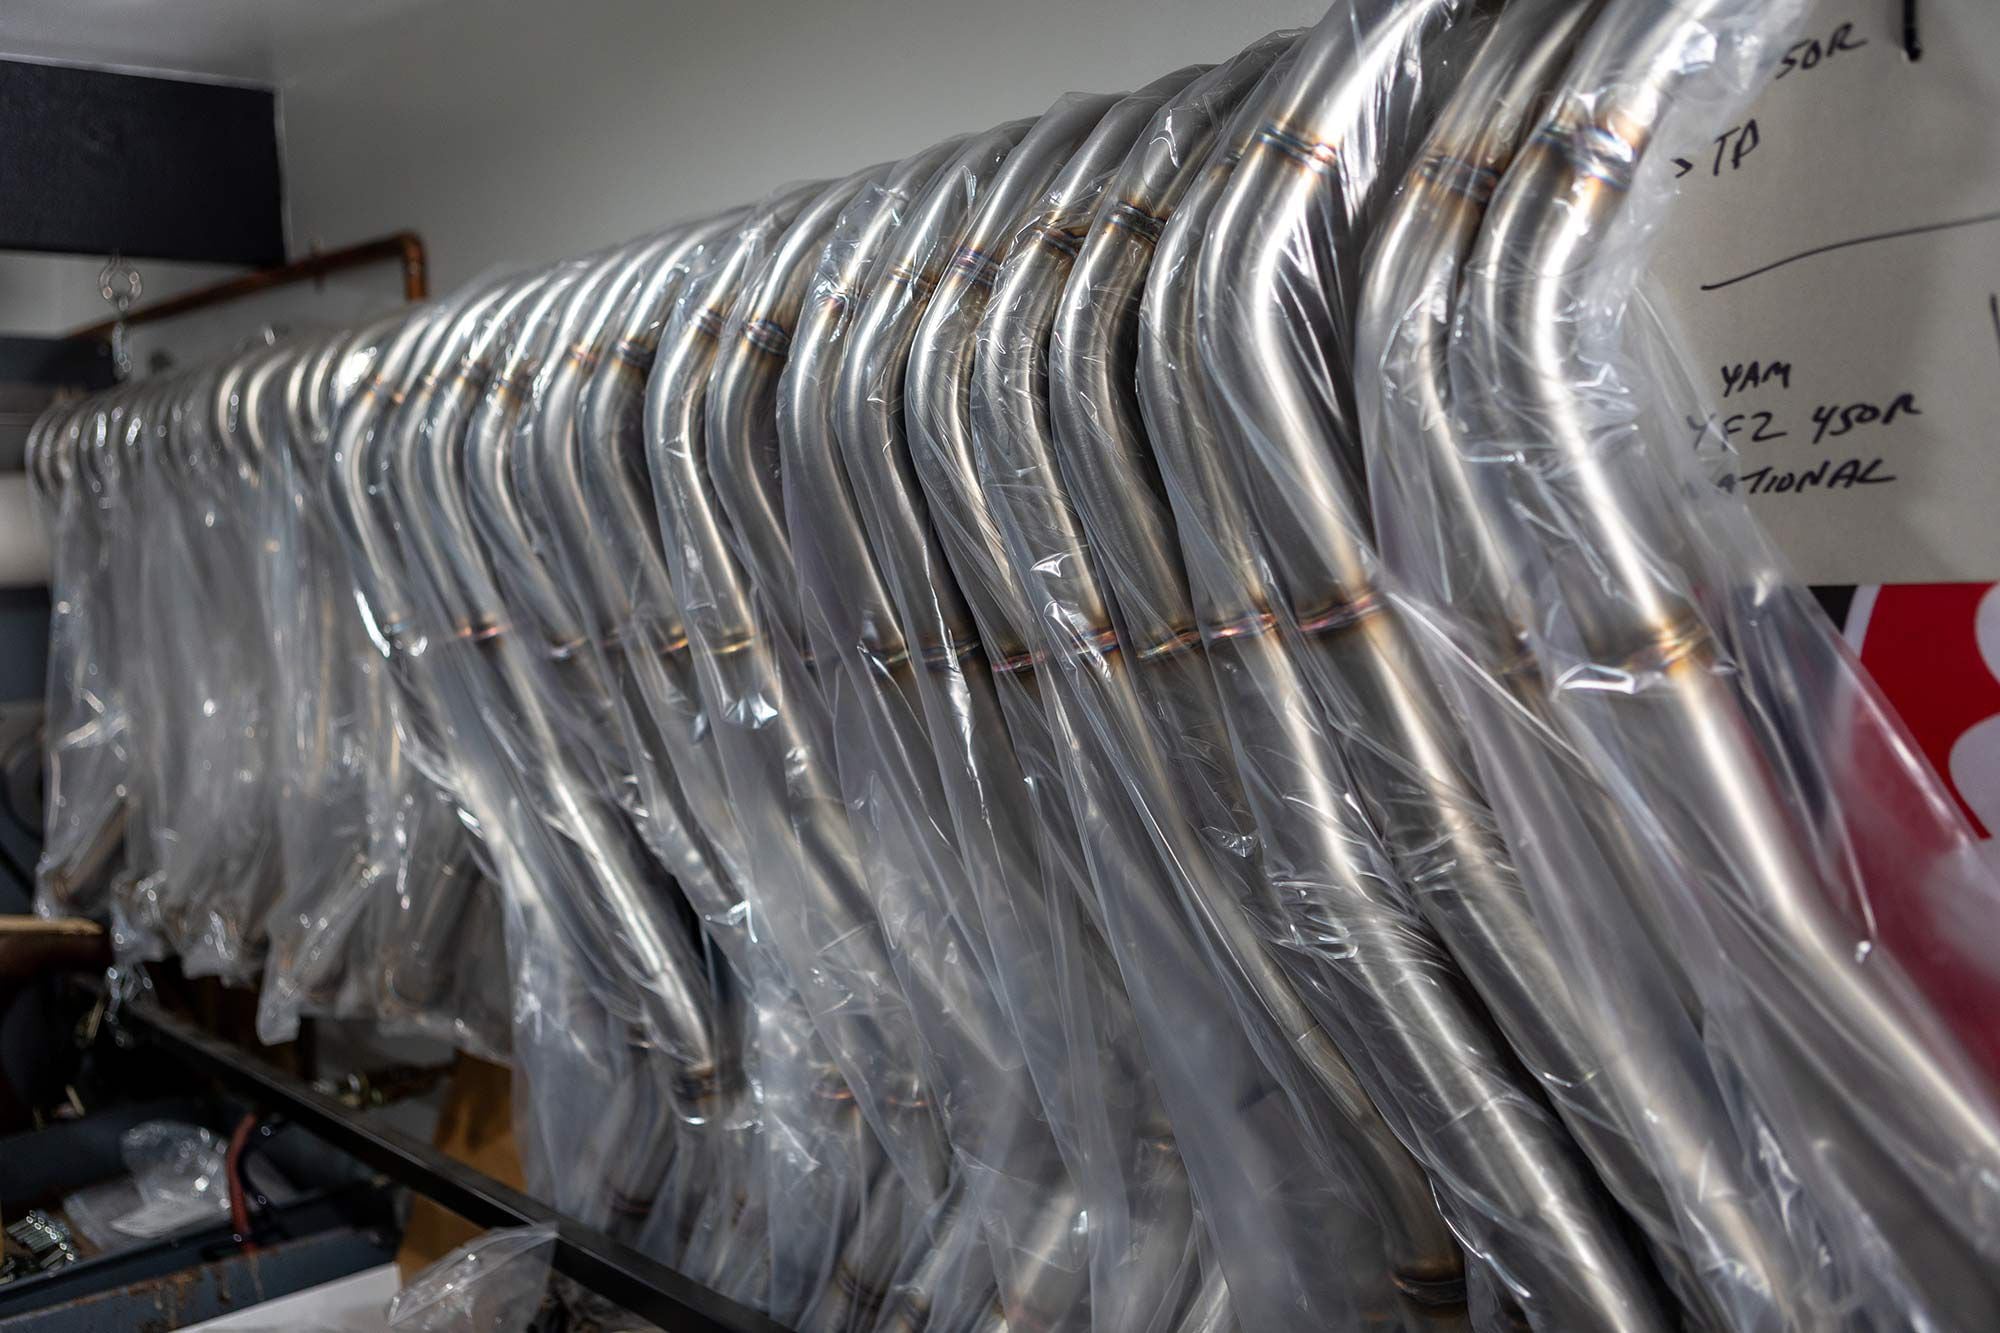 A row of four-stroke exhaust systems are ready for shipping.